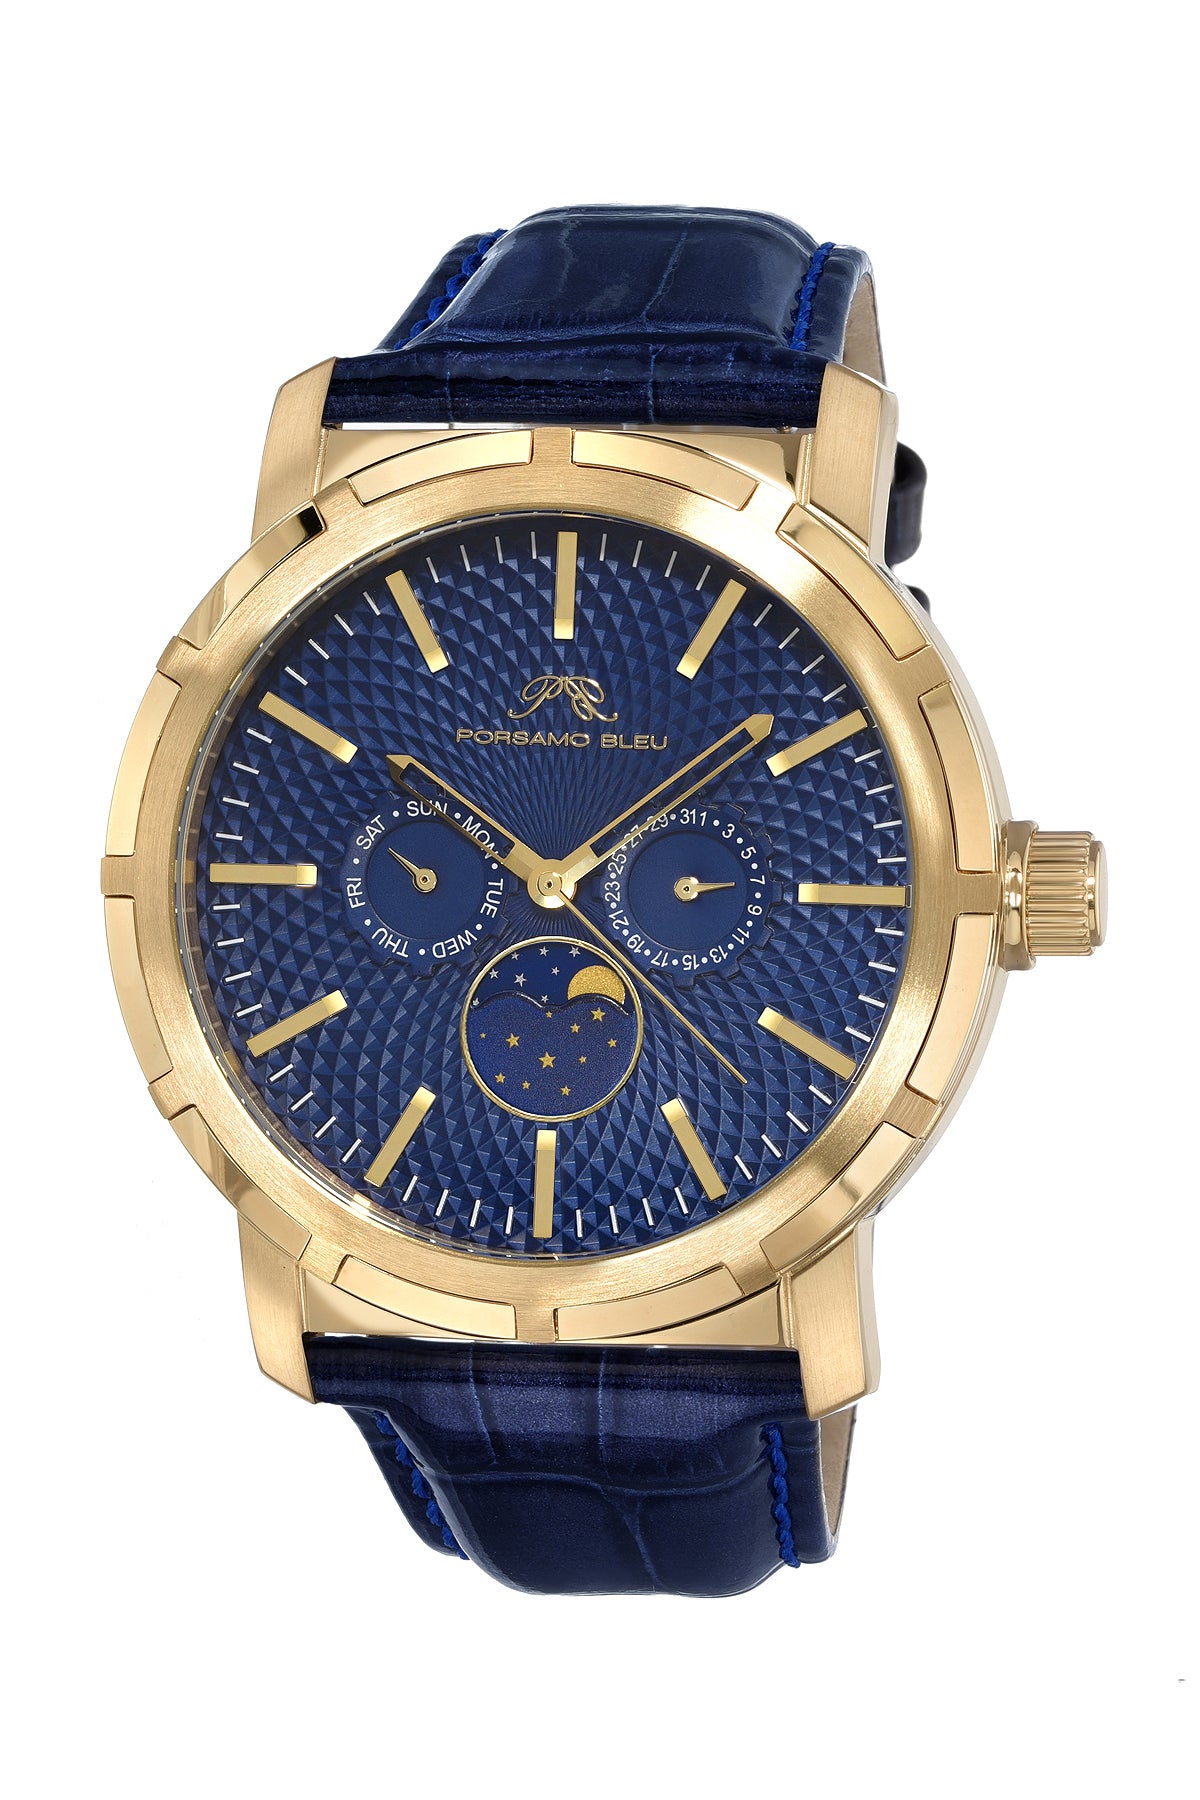 Porsamo Bleu Nycm21 Luxury Moon Phase Mens Genuine Leather Band Watch, Gold With Blue Guilloche Dial 1202BNYL